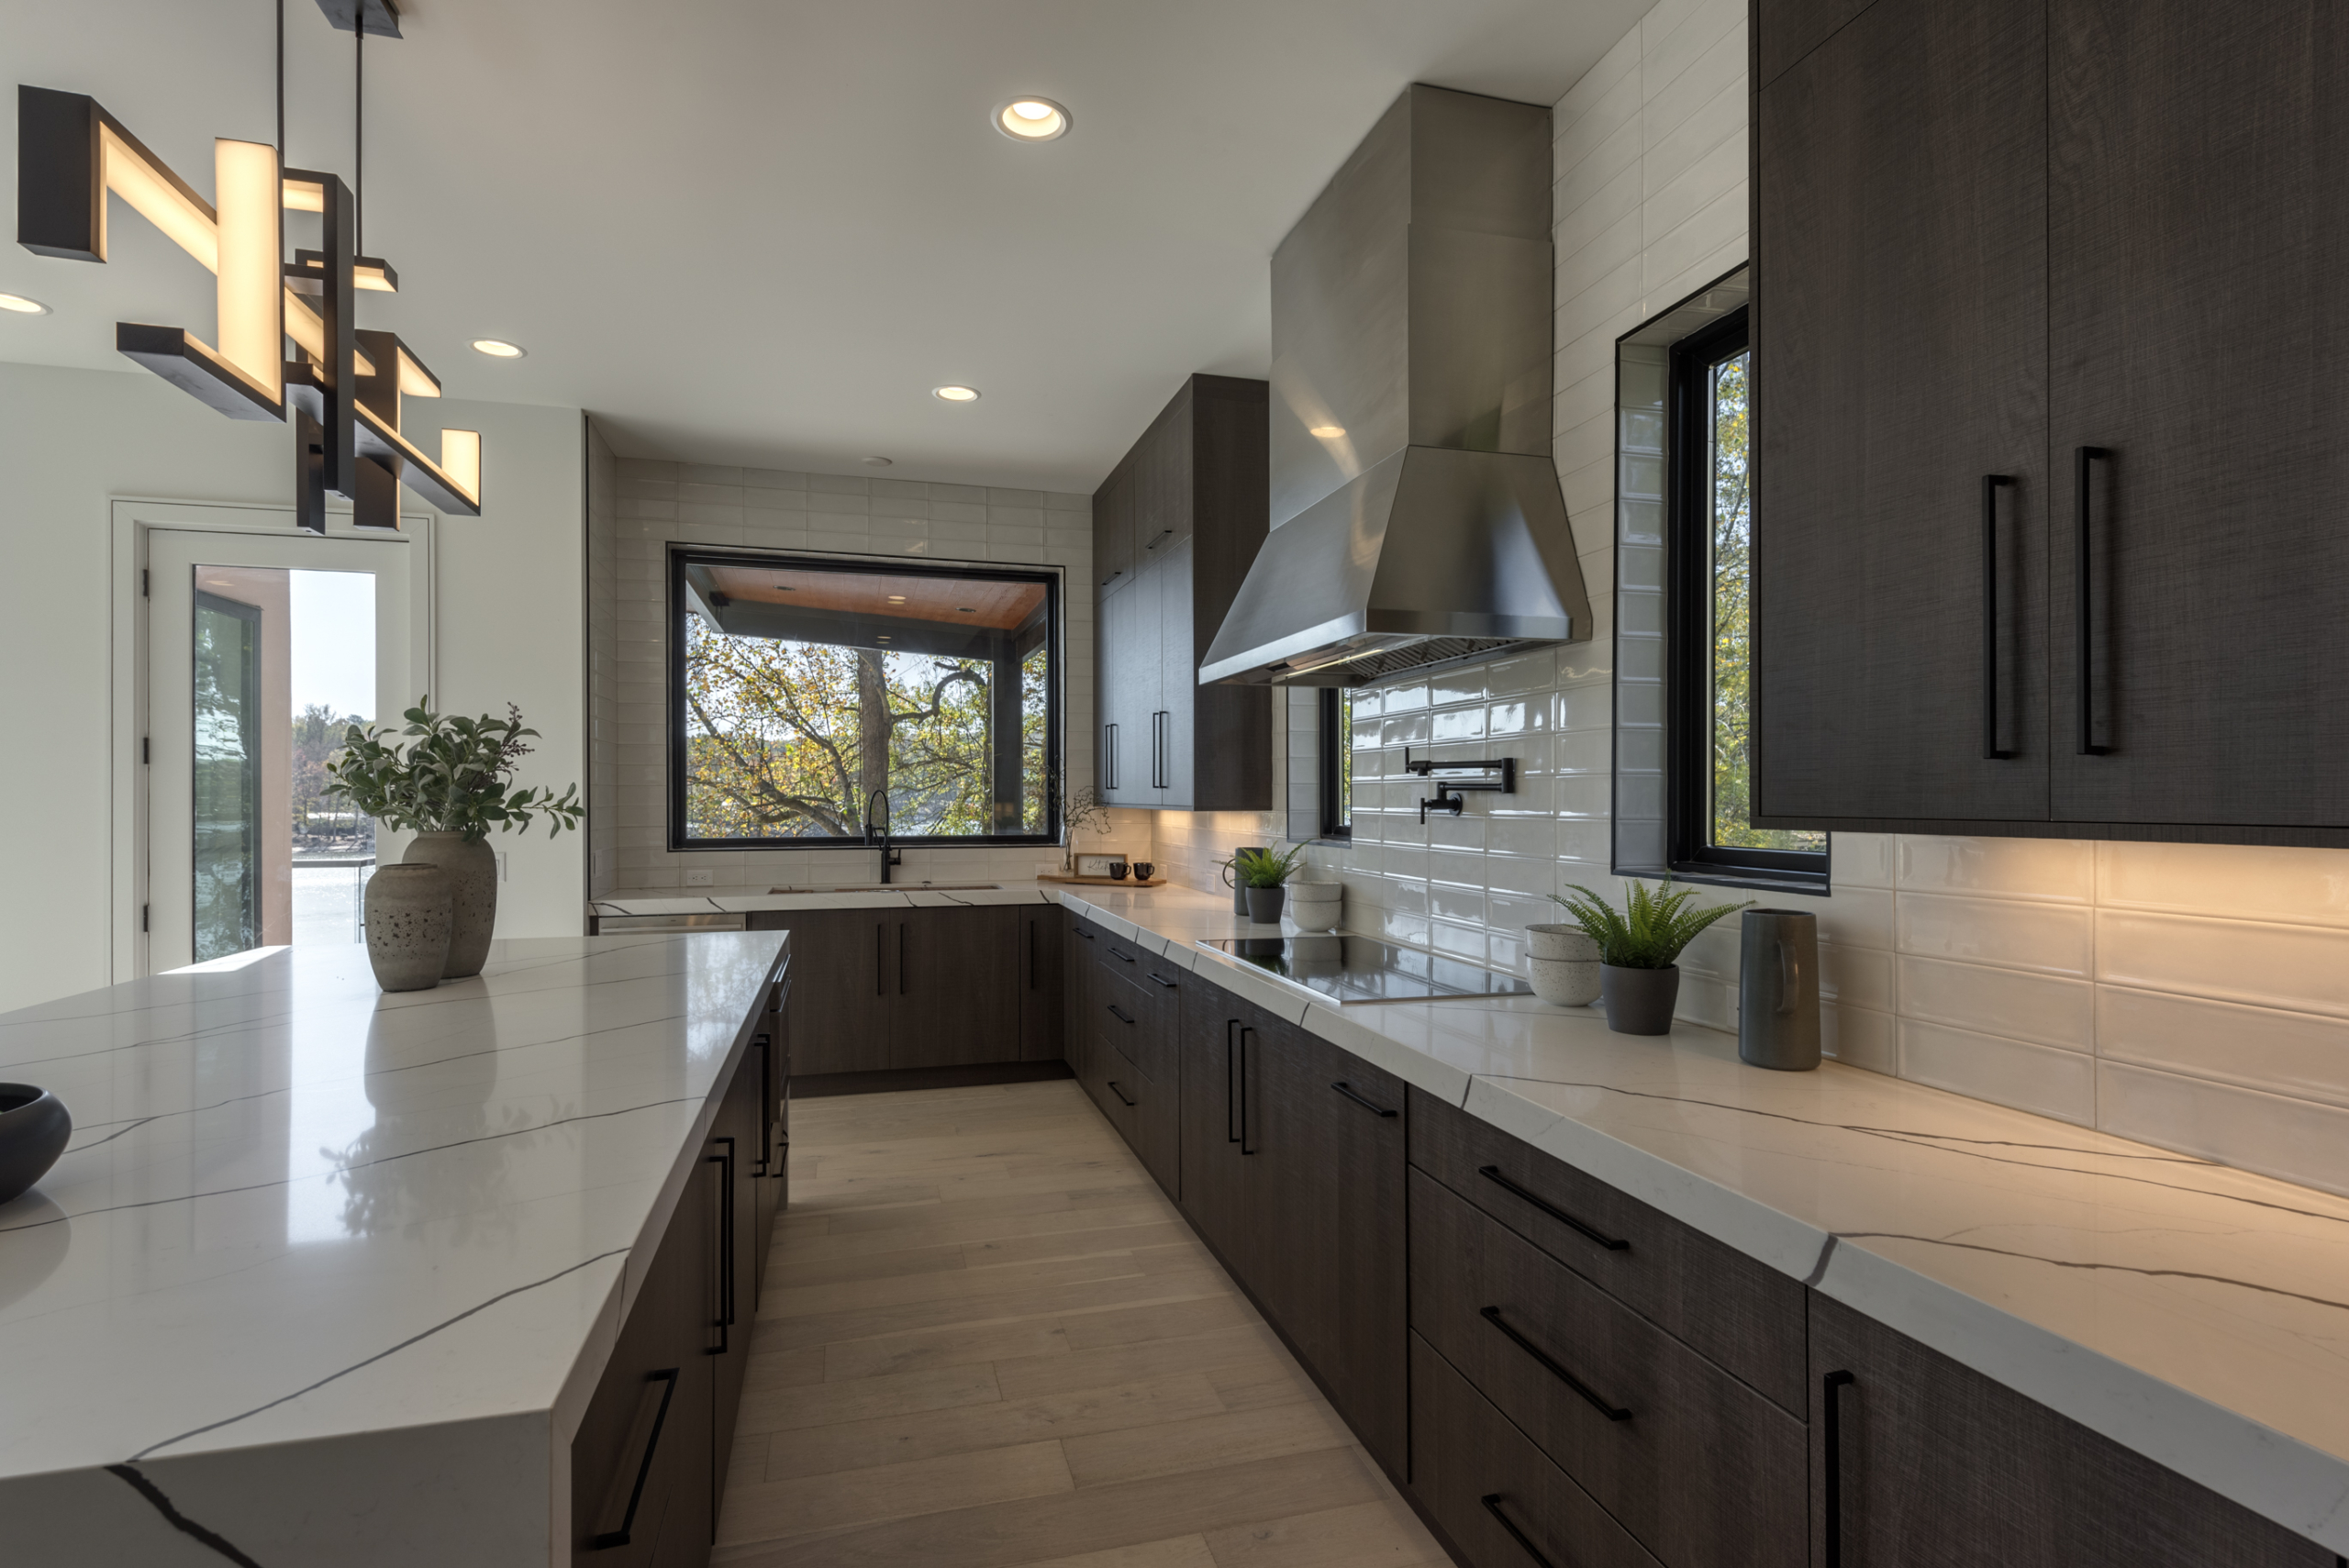 Kitchen has professional Monogram appliances with modern dark wood European cabinetry and a massive 10’ long x 5’ wide waterfall island. Includes a 42” Miele induction cooktop and pot filler, and subway tile white backsplash, waterfall island, white marble thick countertops